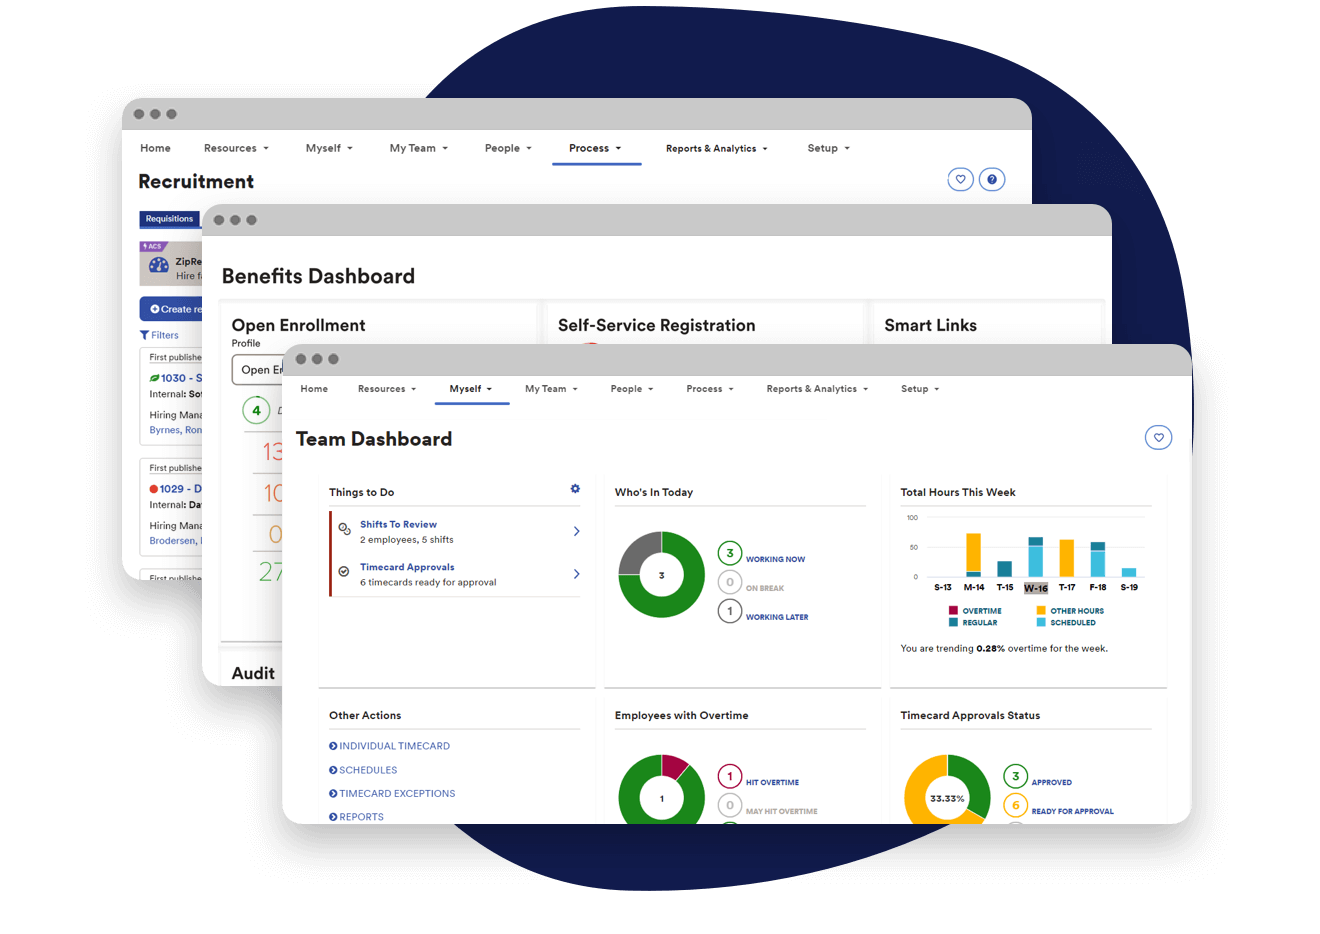 Screenshots of recruitment, benefits, and talent dashboards window browsers